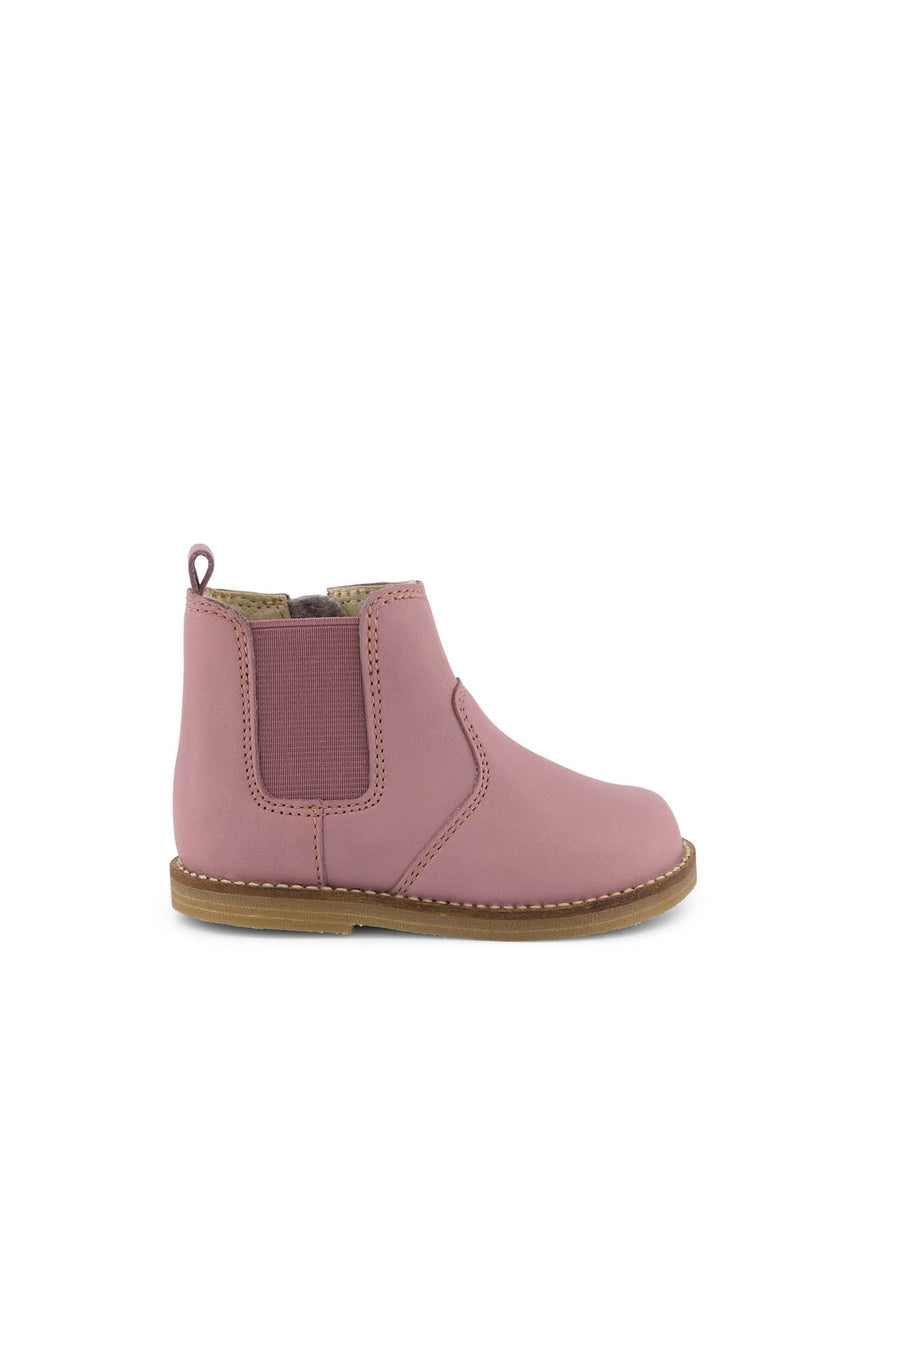 Leather Boot with Elastic Side - Lilium Childrens Footwear from Jamie Kay NZ